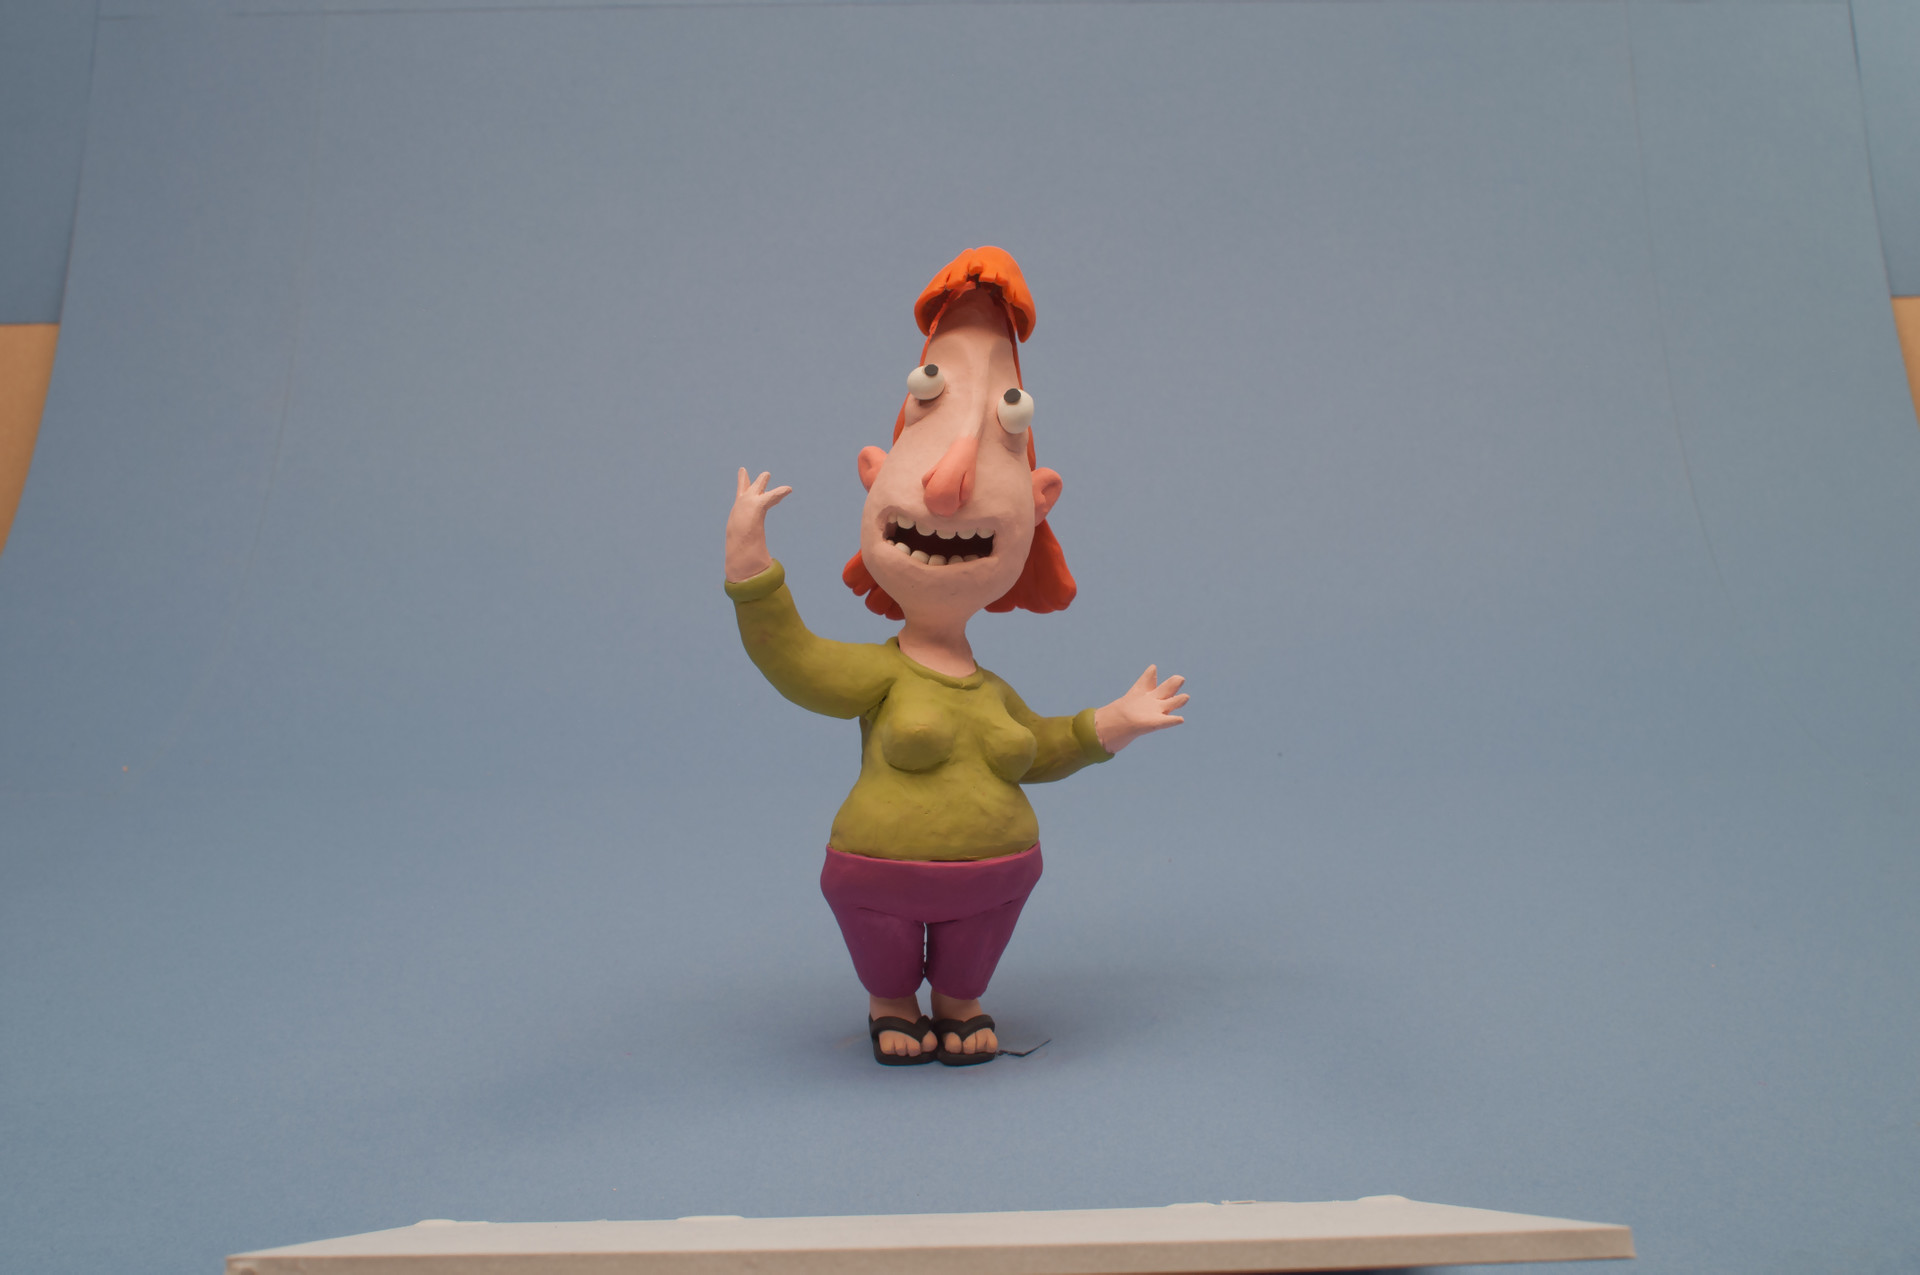 ArtStation - Stop motion and claymation